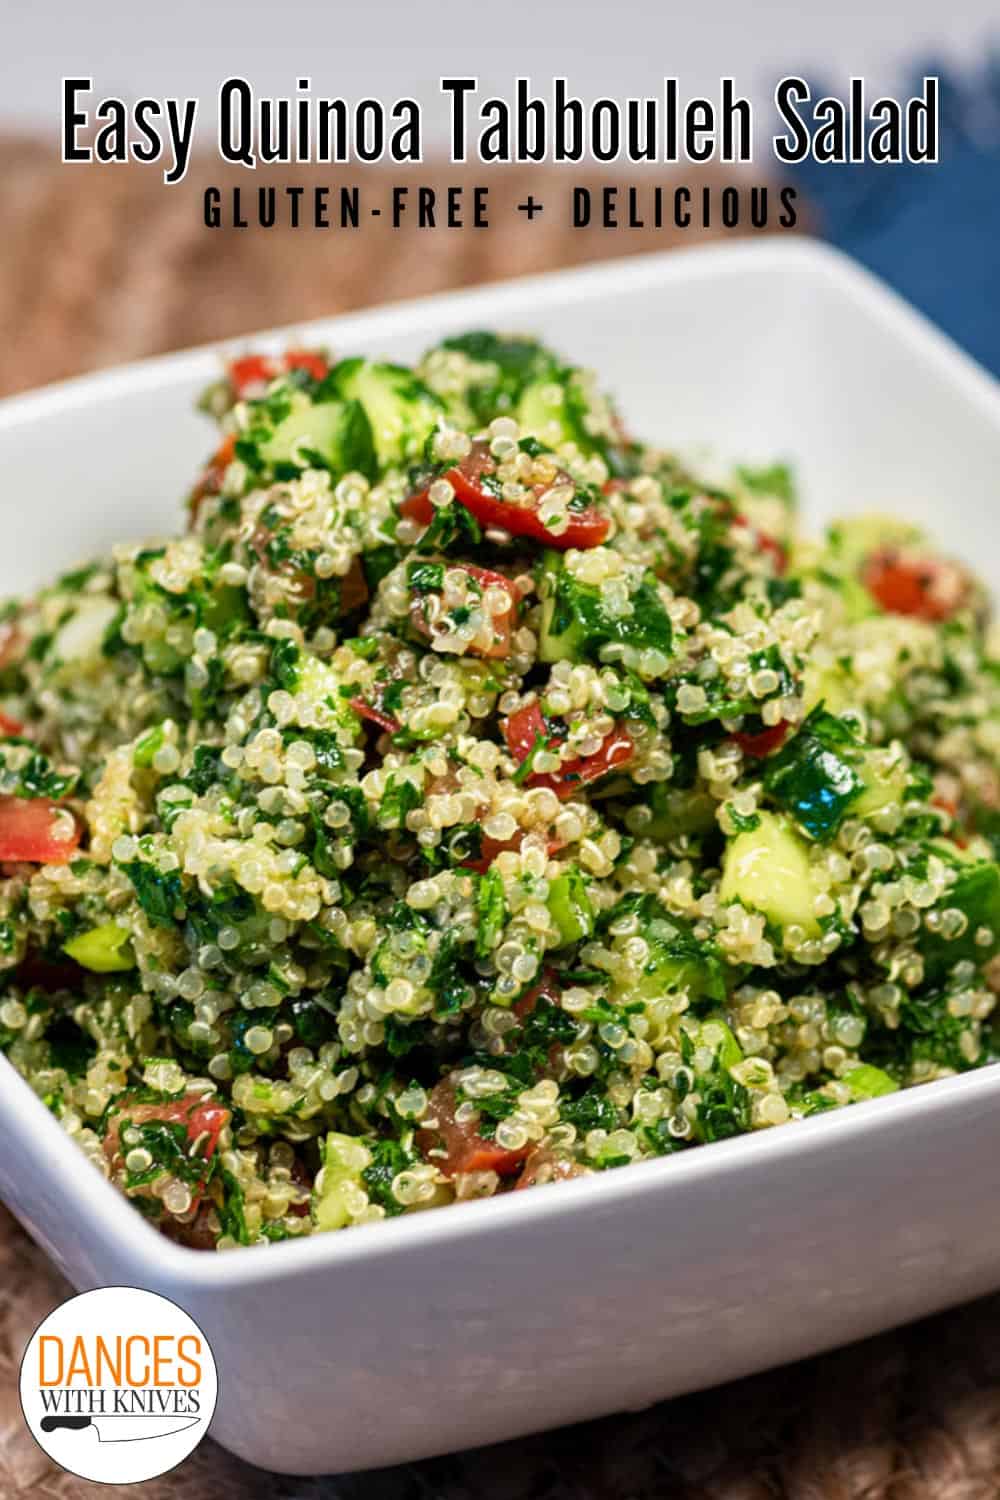 Easy Quinoa Tabbouleh Salad | Dances with Knives